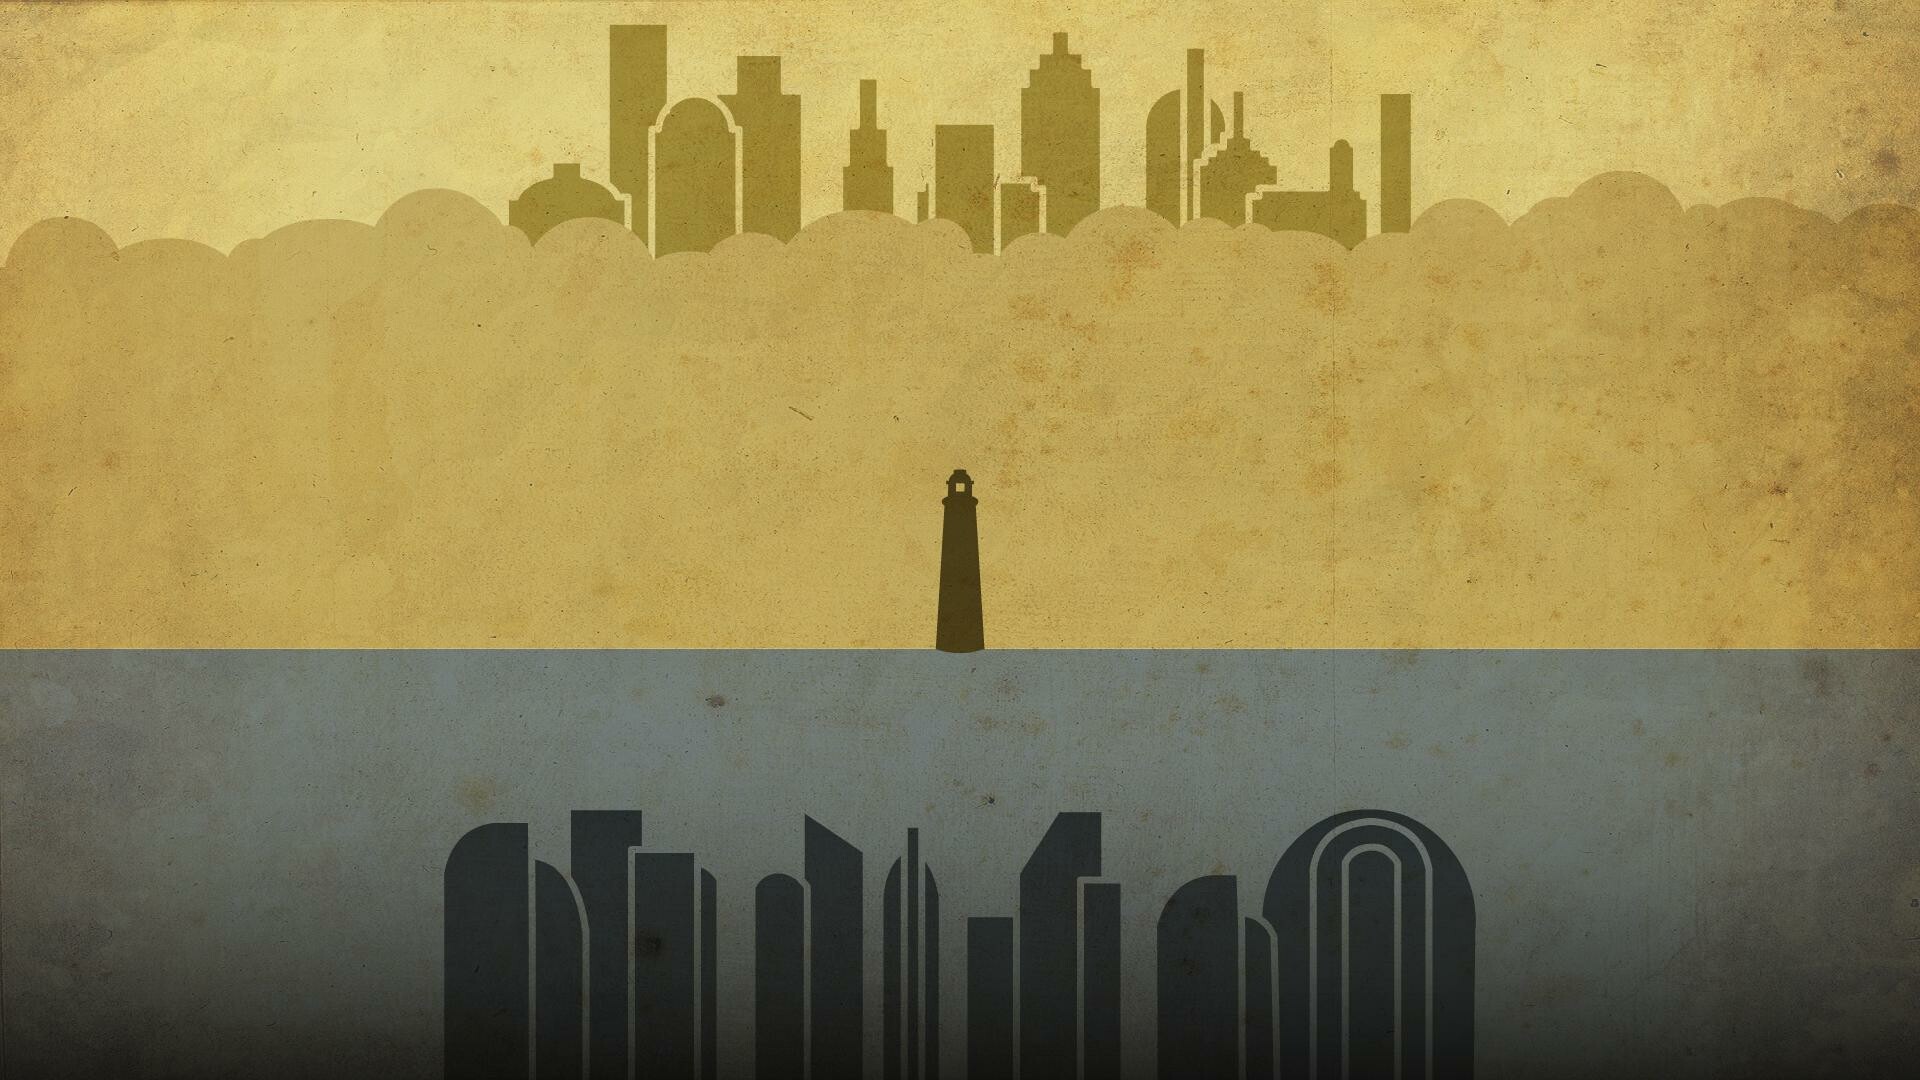 BioShock: The game takes place in the late 1950s, in an underwater "utopia" of Rapture, Minimalistic. 1920x1080 Full HD Wallpaper.